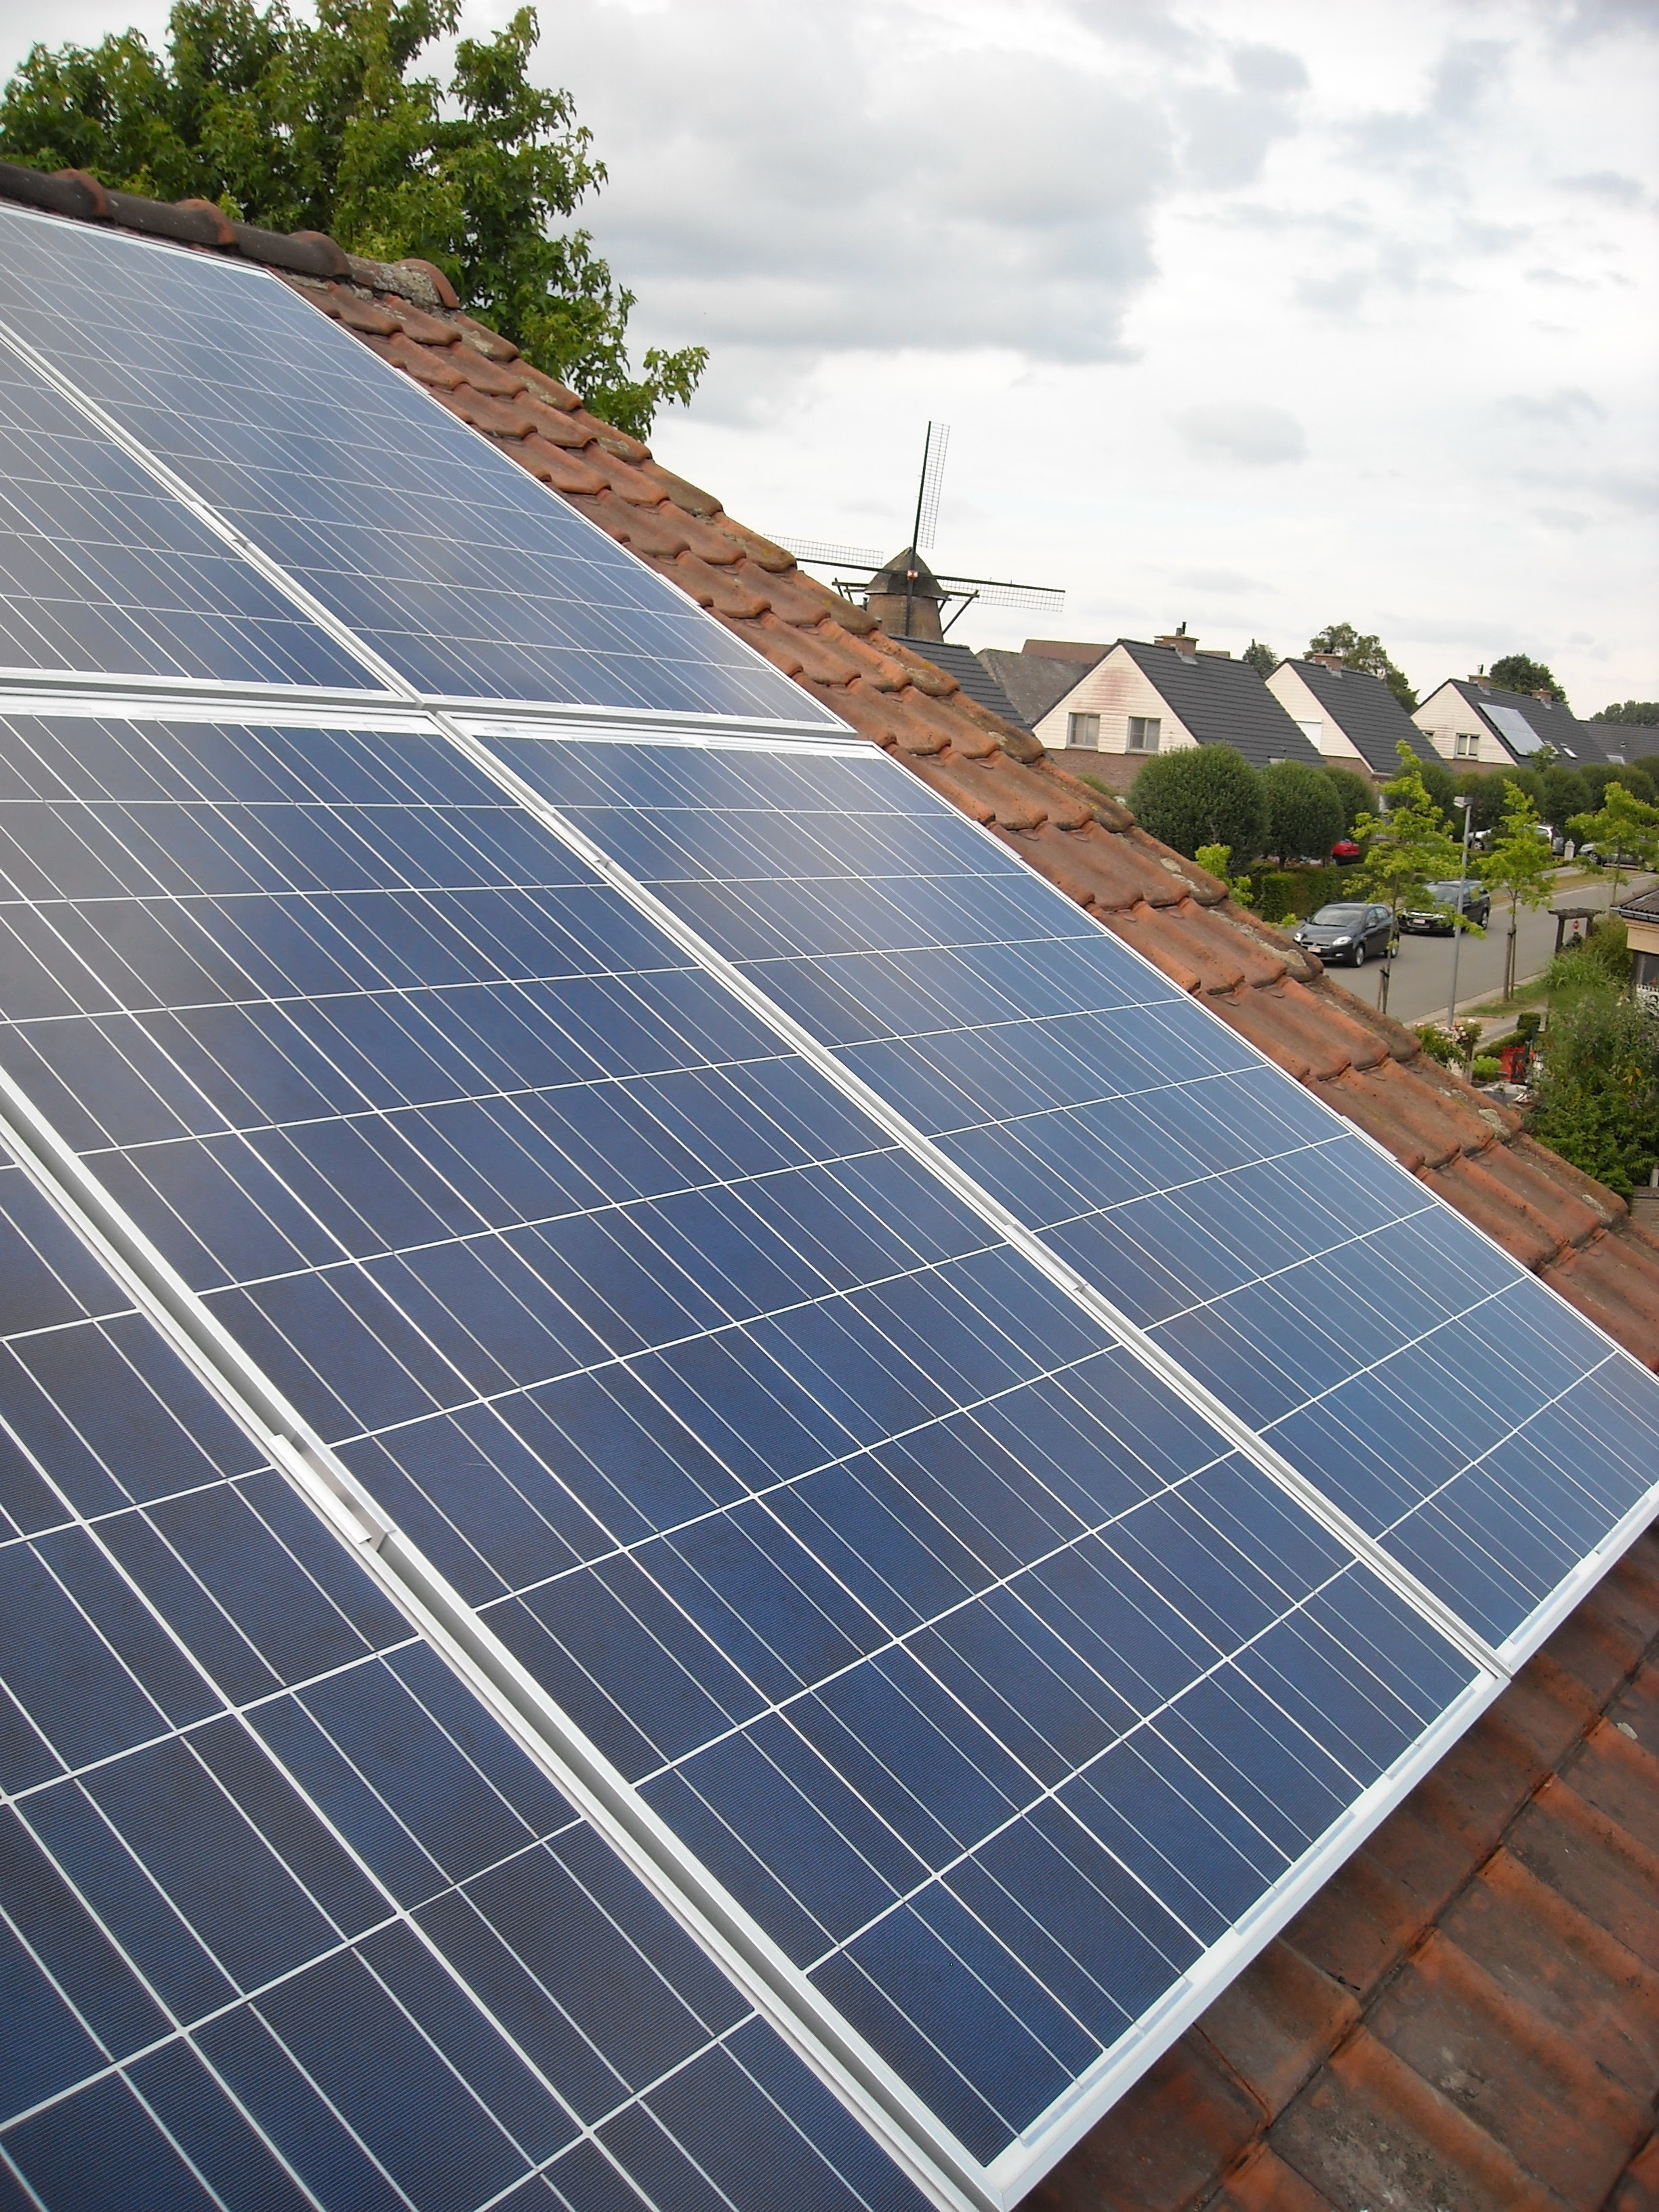 It'd be nice to have both rooftop solar and a renewable grid in California.